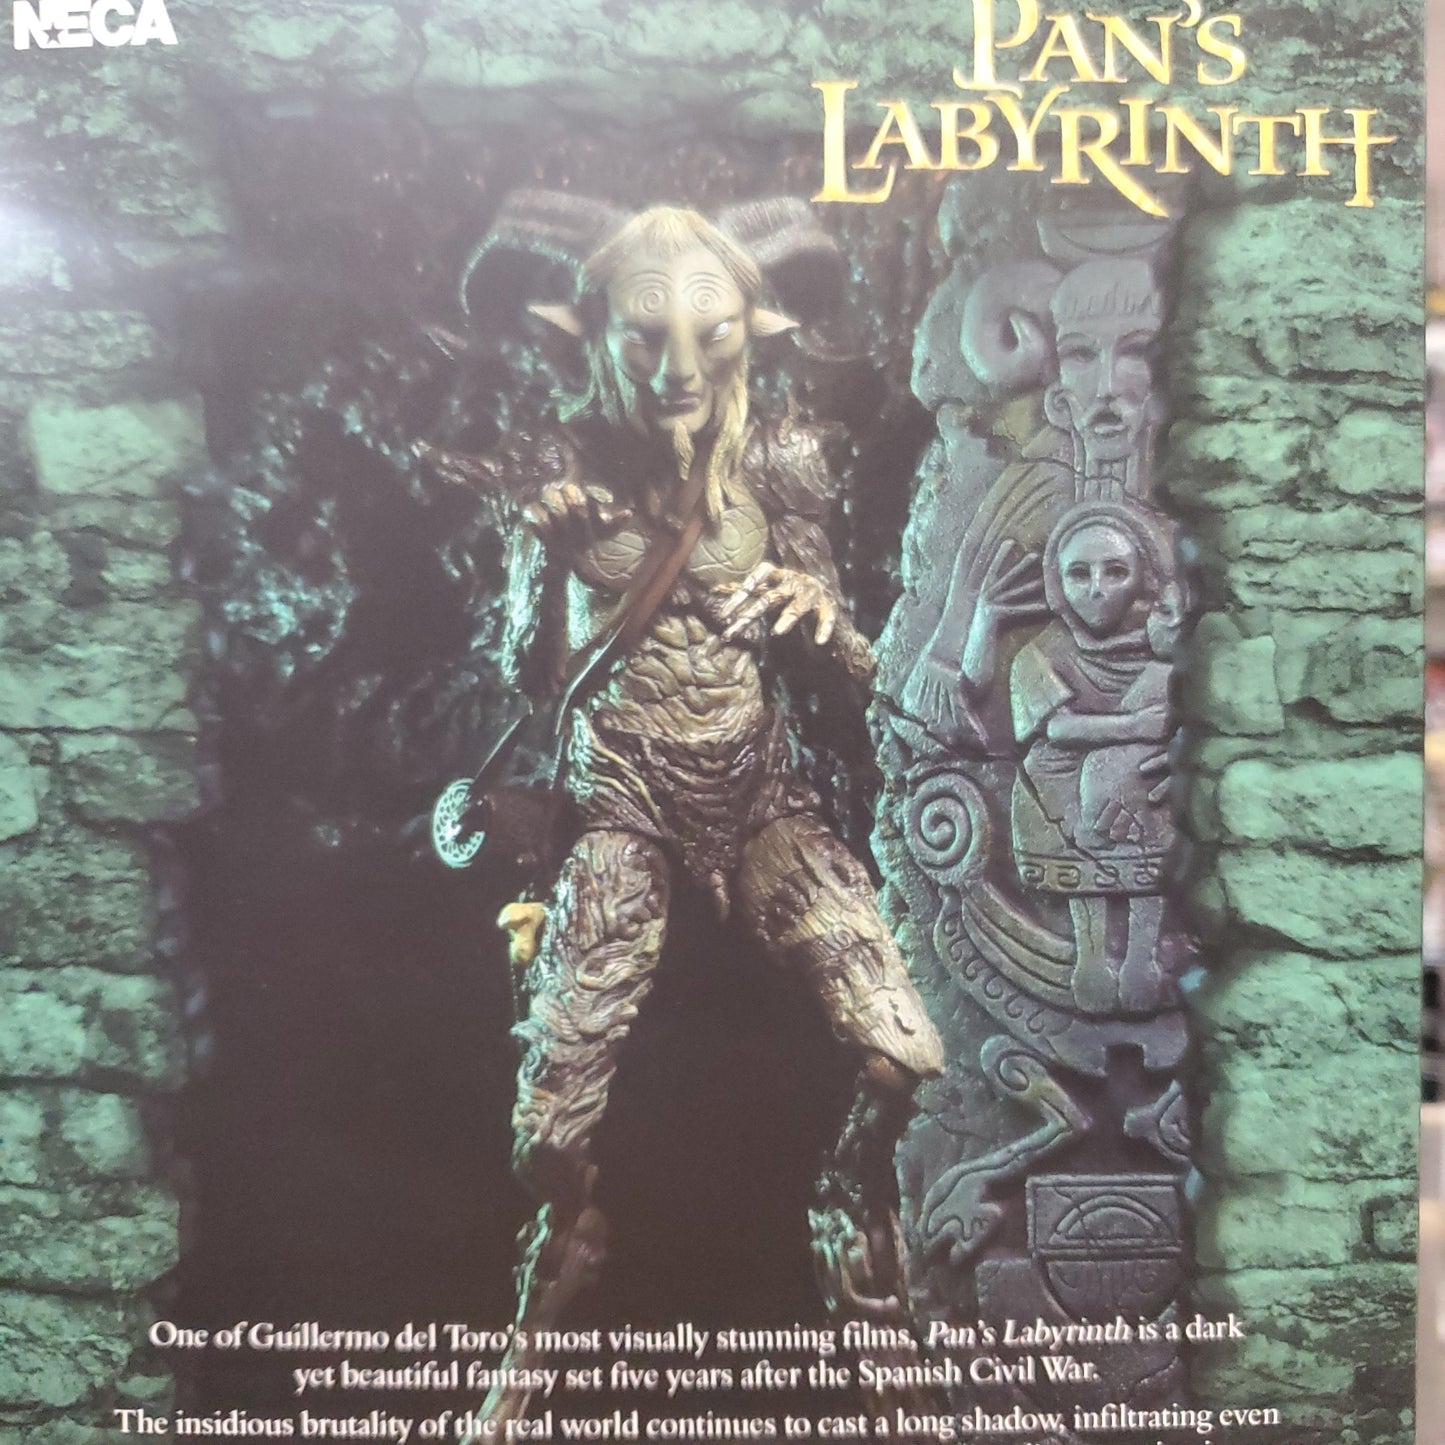 Neca pans Labrynth old faun figure